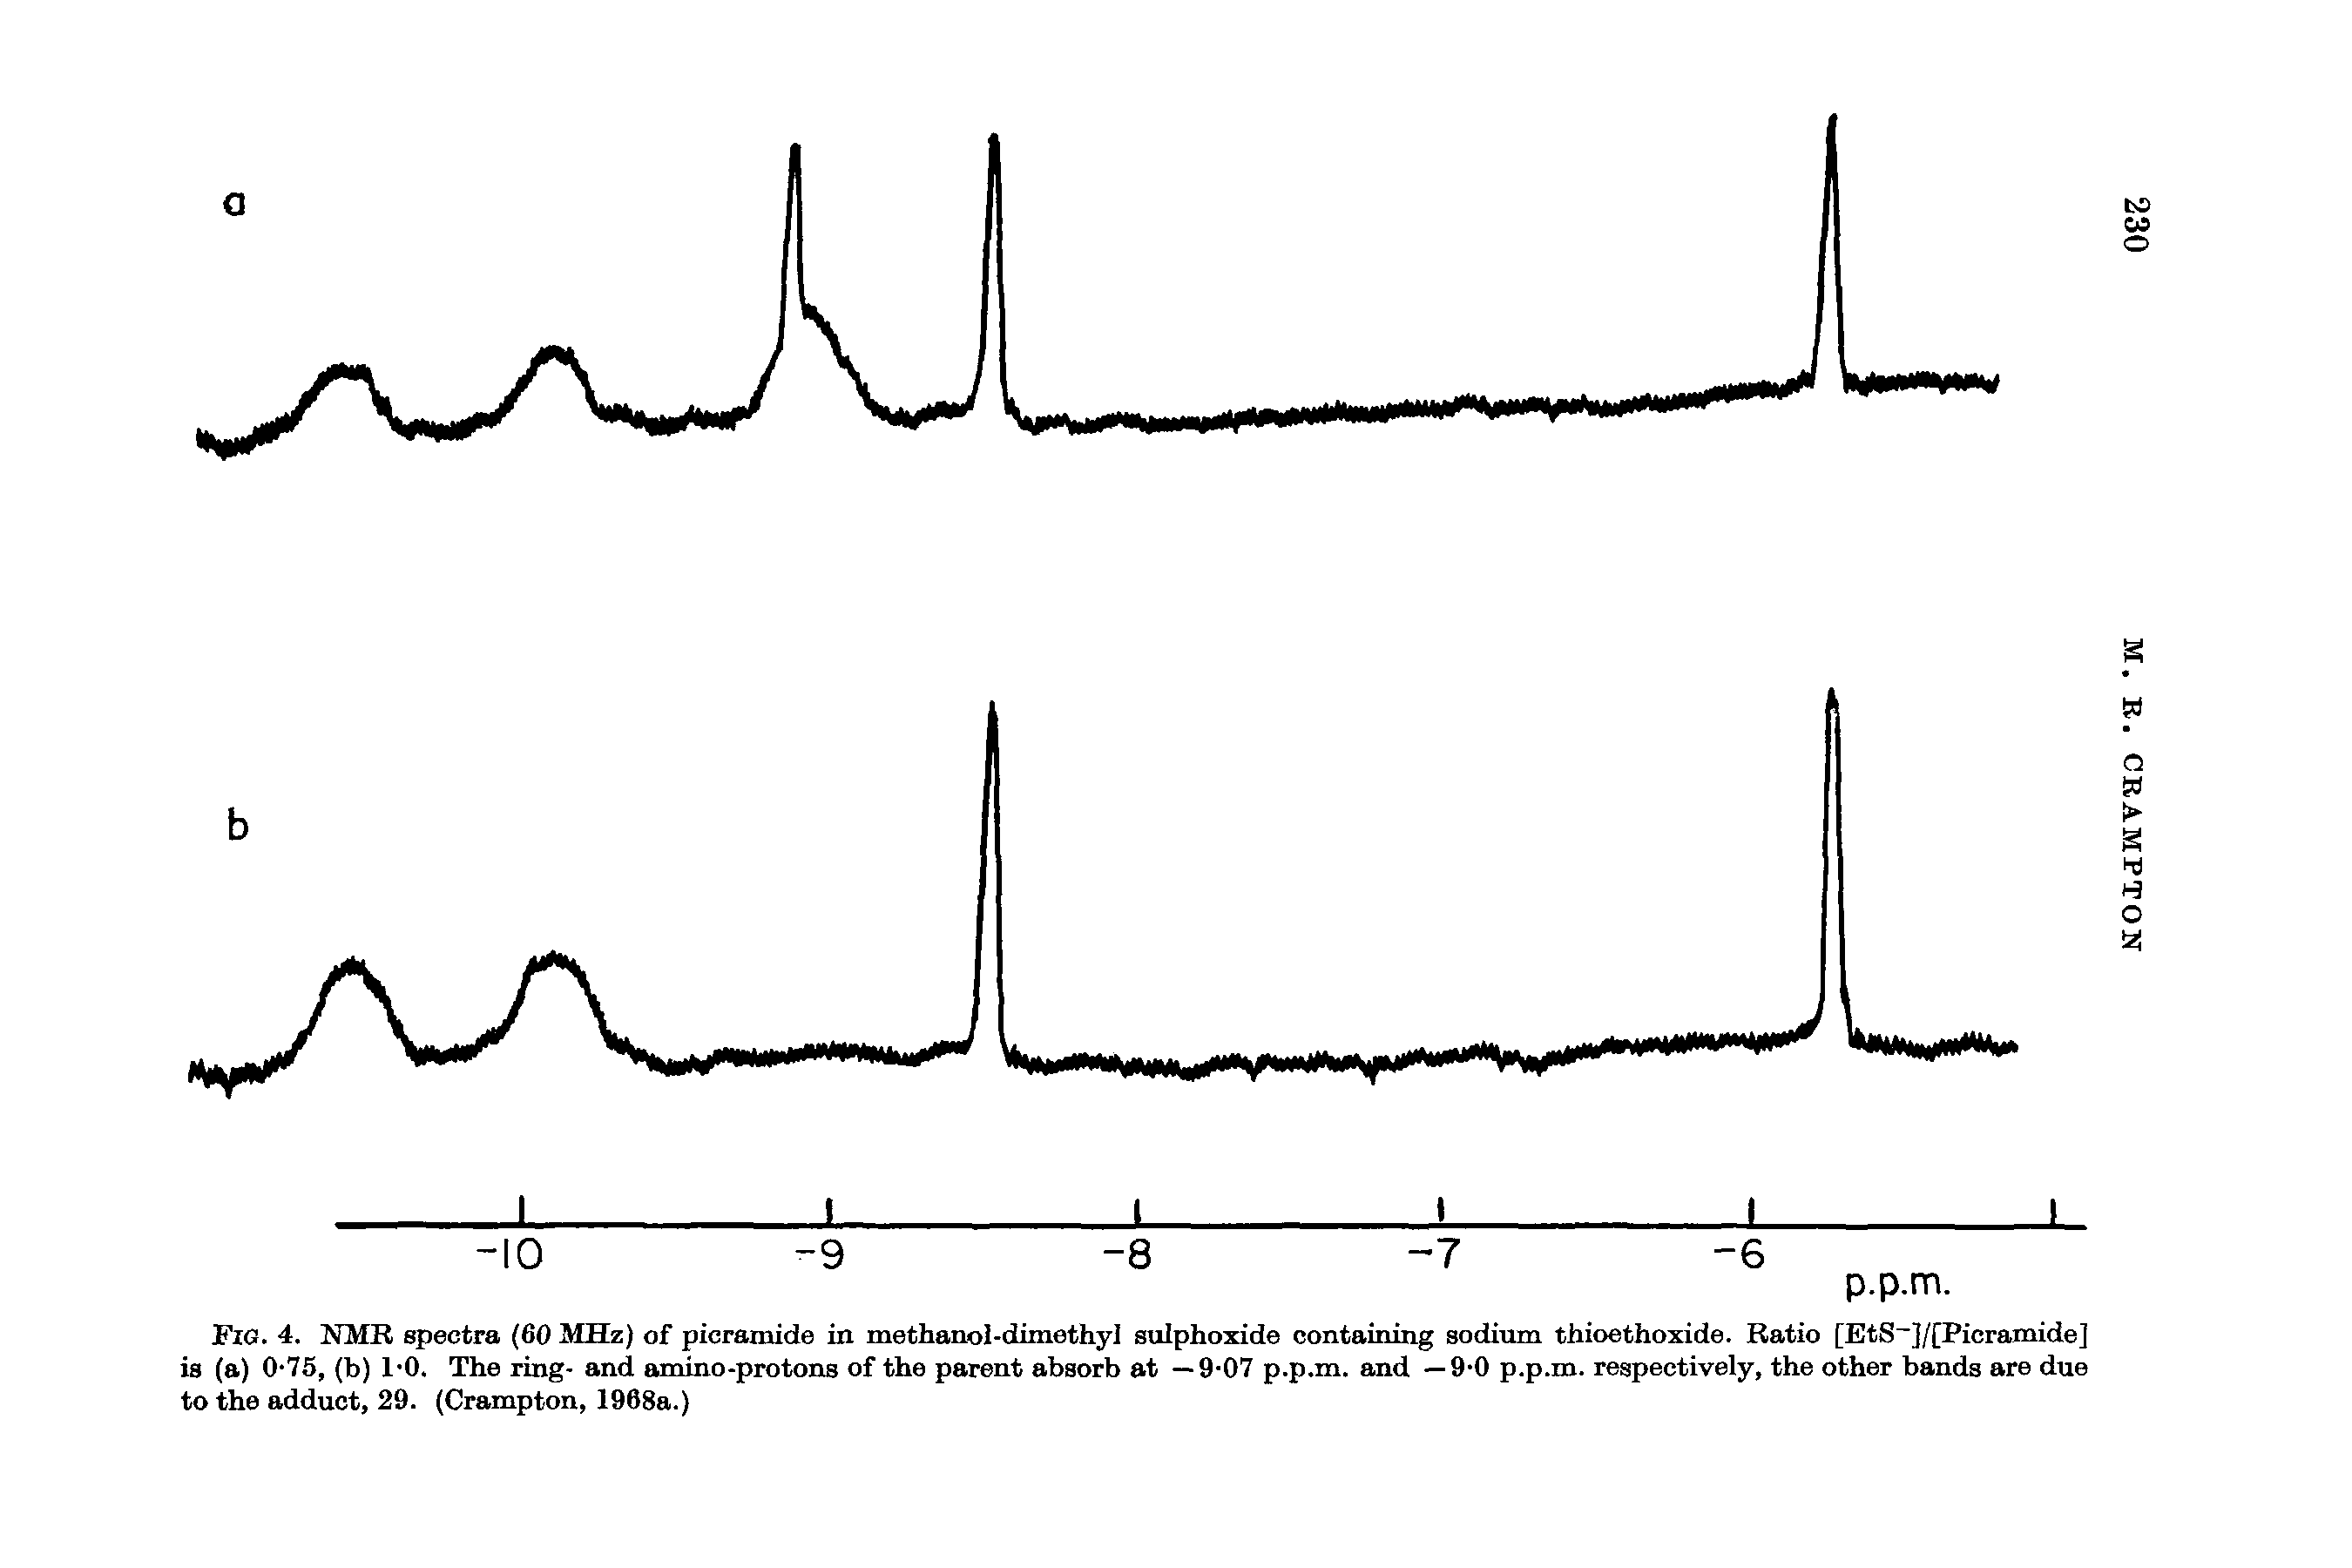 Fig. 4. NMR spectra (60 MHz) of picramide in methanol-dimethyl sulphoxide containing sodium thioethoxide. Ratio [EtS ]/[Picramide] is (a) 0-75, (b) 1-0. The ring- and amino-protons of the parent absorb at -9-07 p.p.m. and -9-0 p.p.m. respectively, the other bands are due to the adduct, 29. (Crampton, 1968a.)...